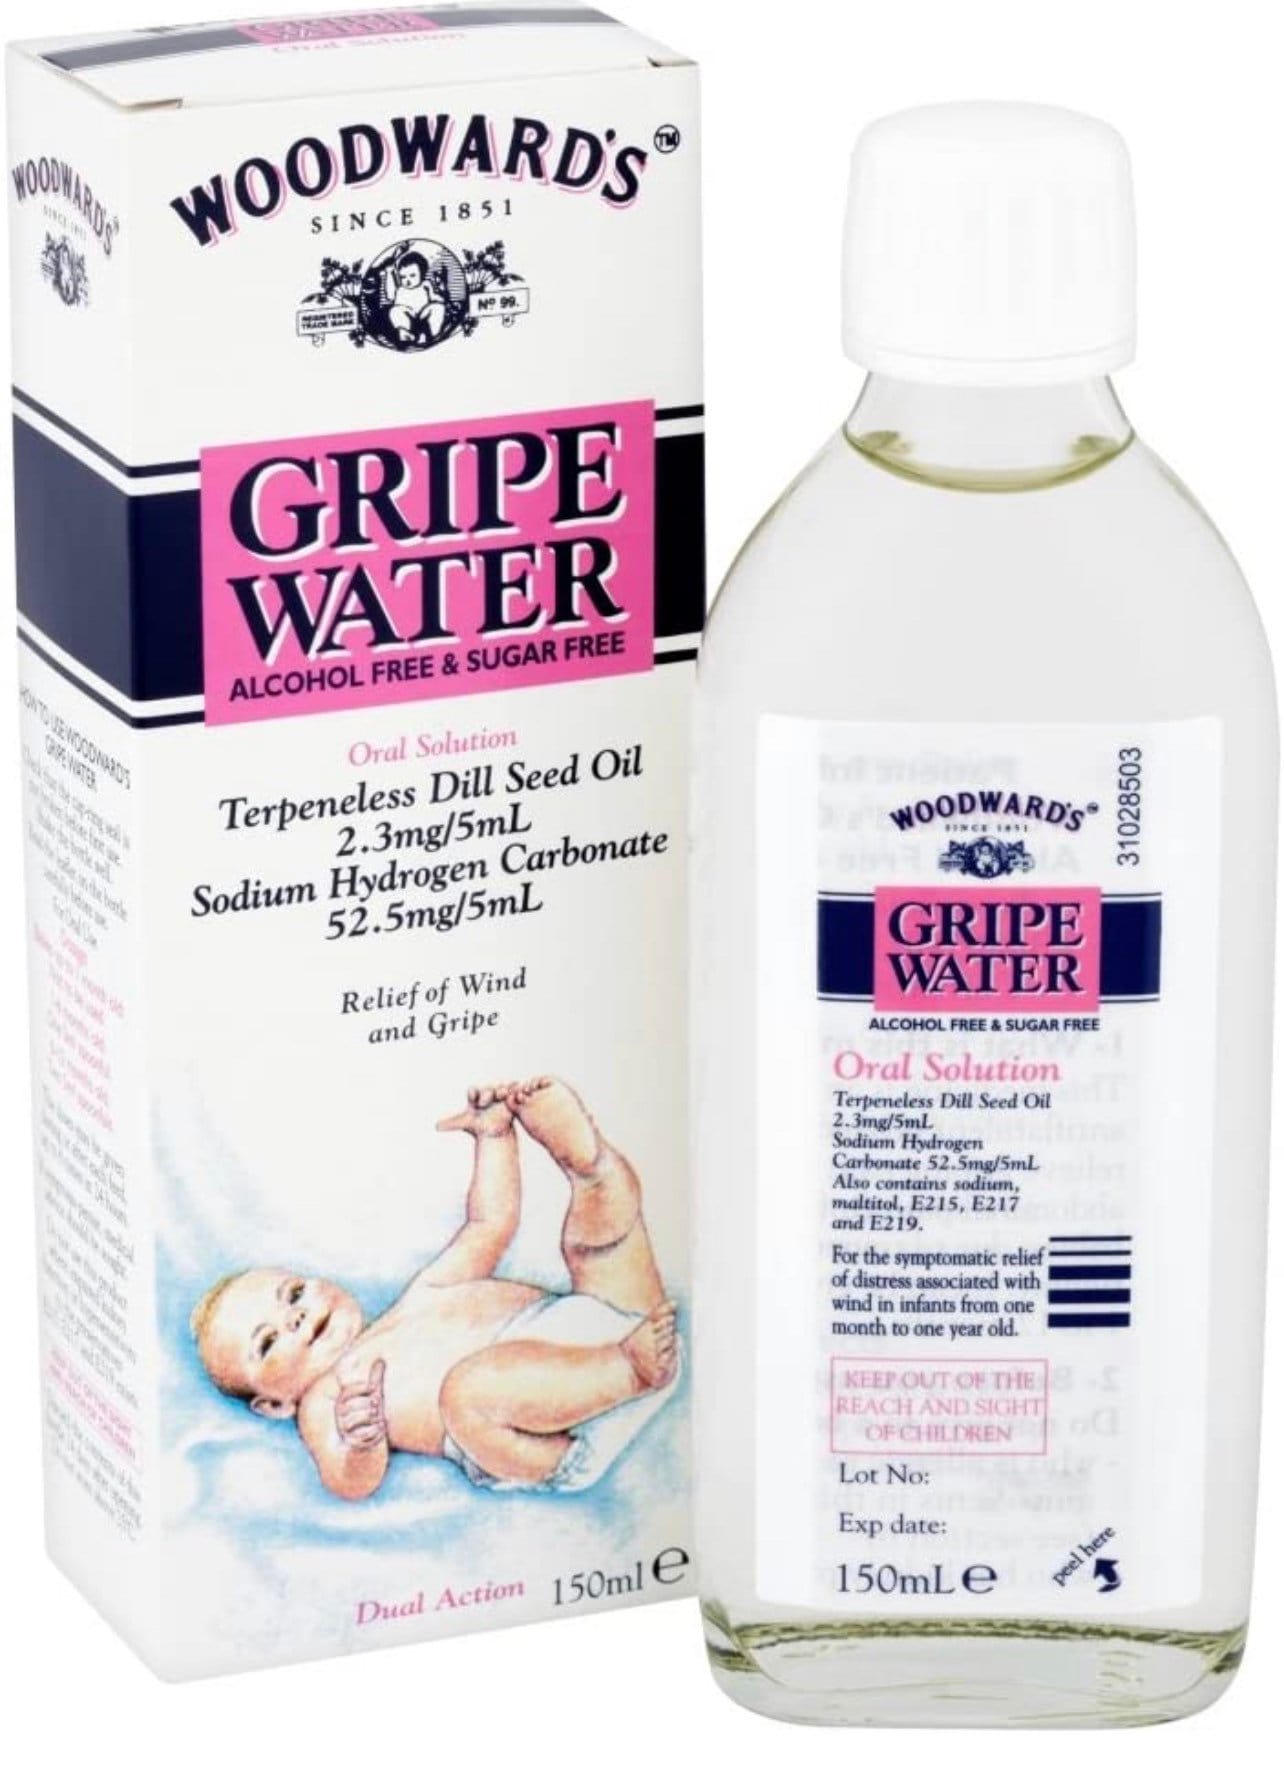 Gripe Water for Babies — What Is It and Is It Safe for Newborns?